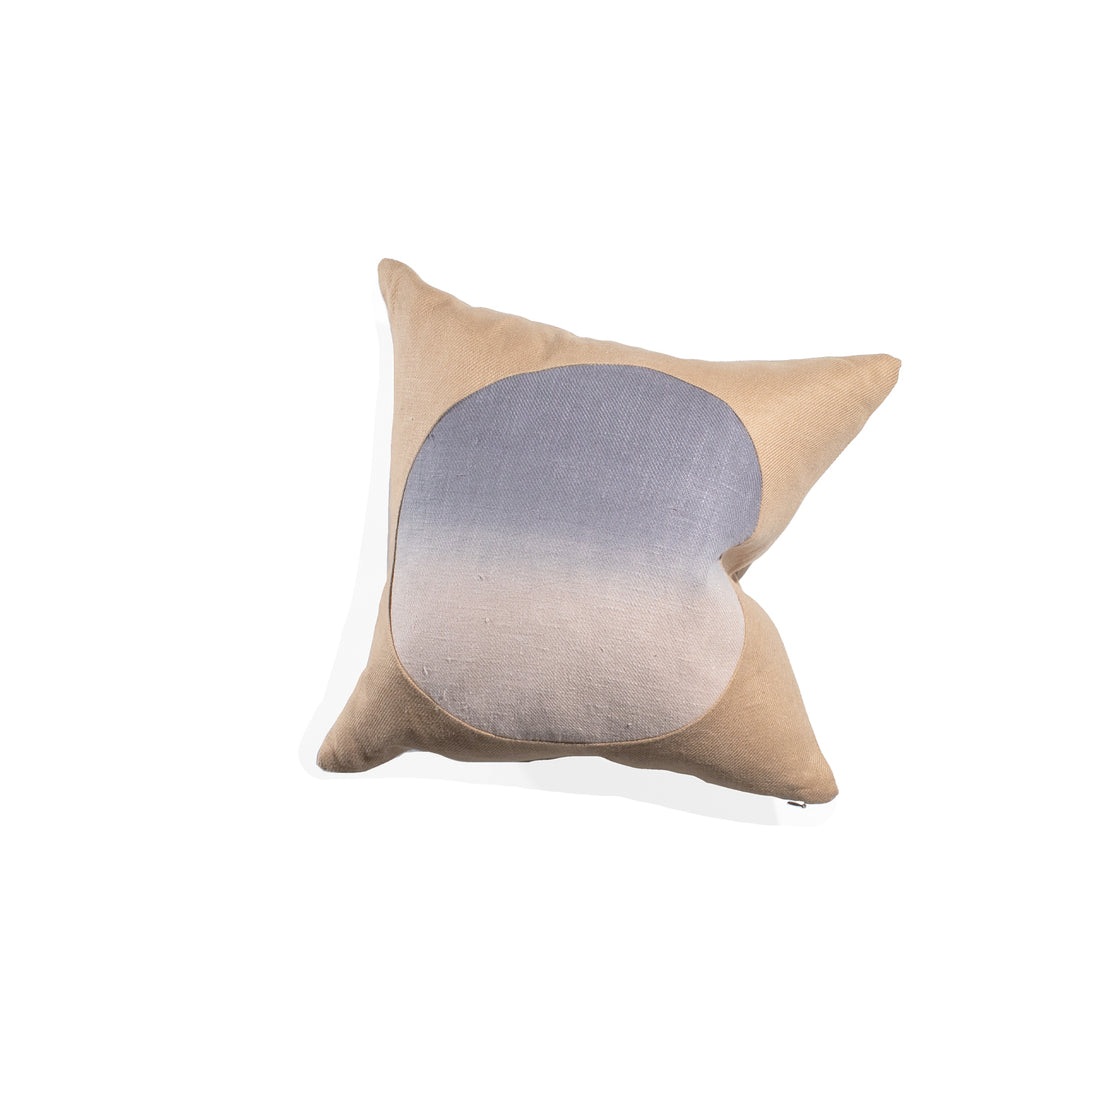 Correll Correll Gradient Circle Pillow in Roasted